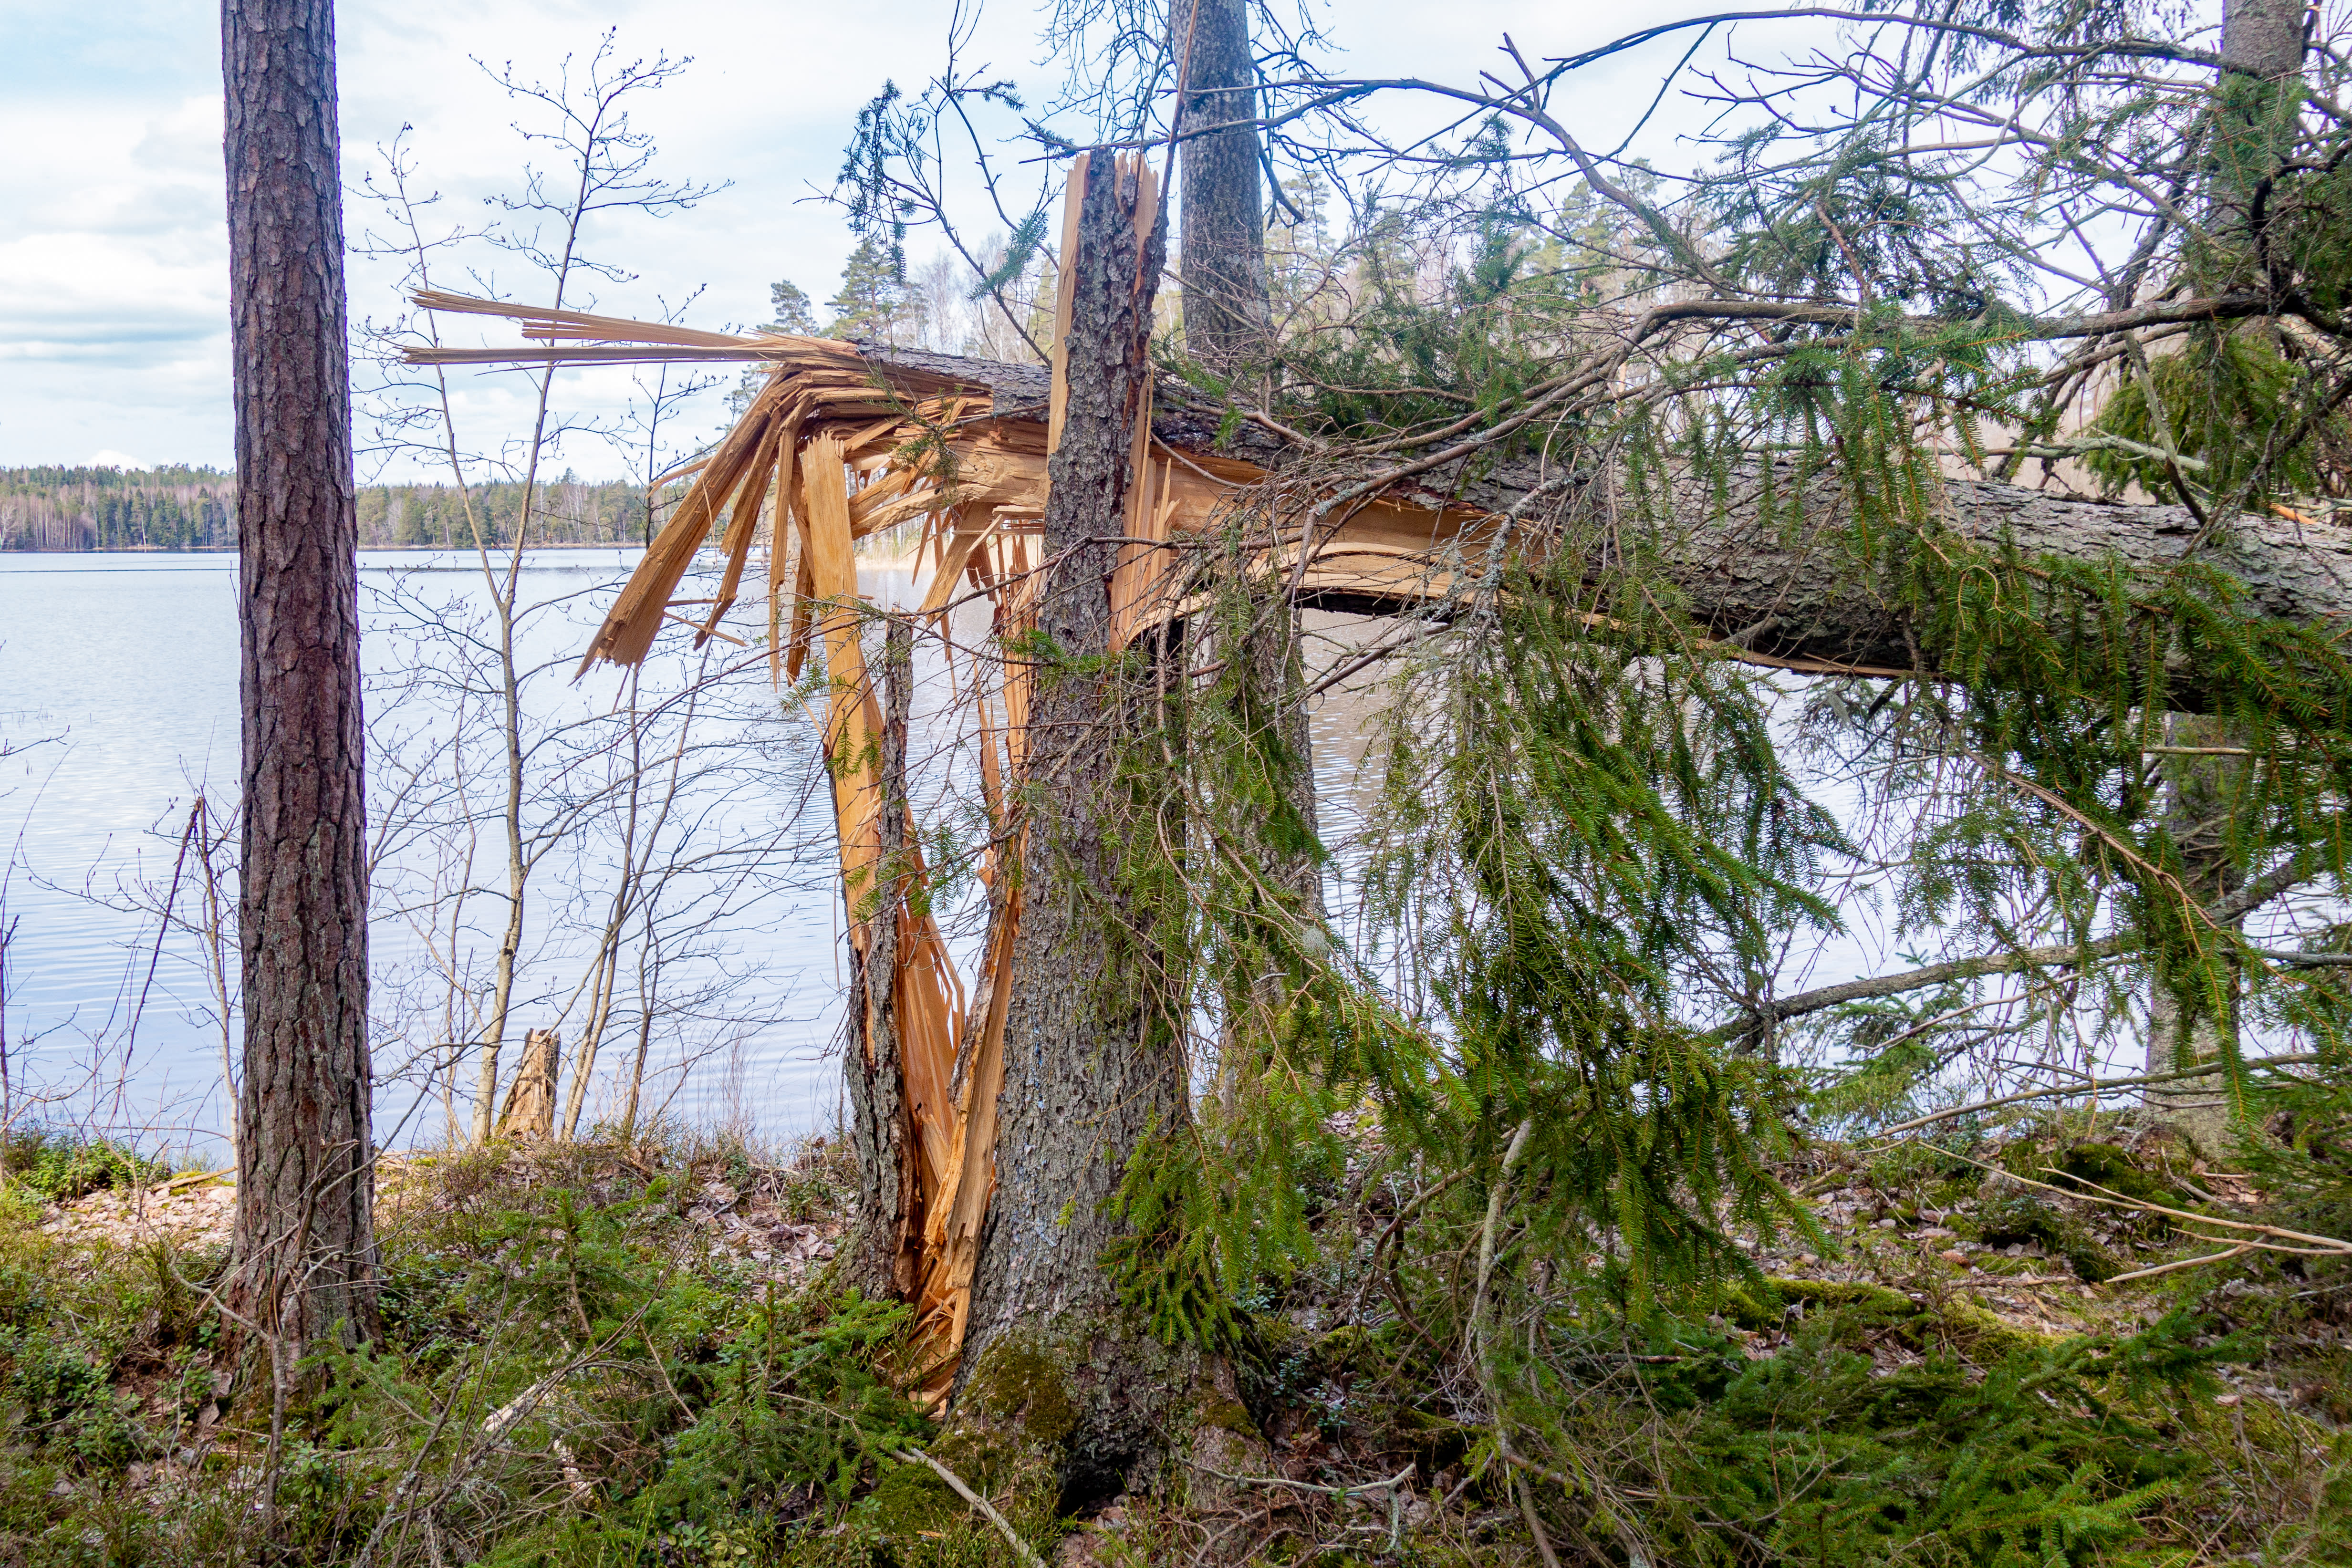 The autumn storm swept over Finland on Wednesday